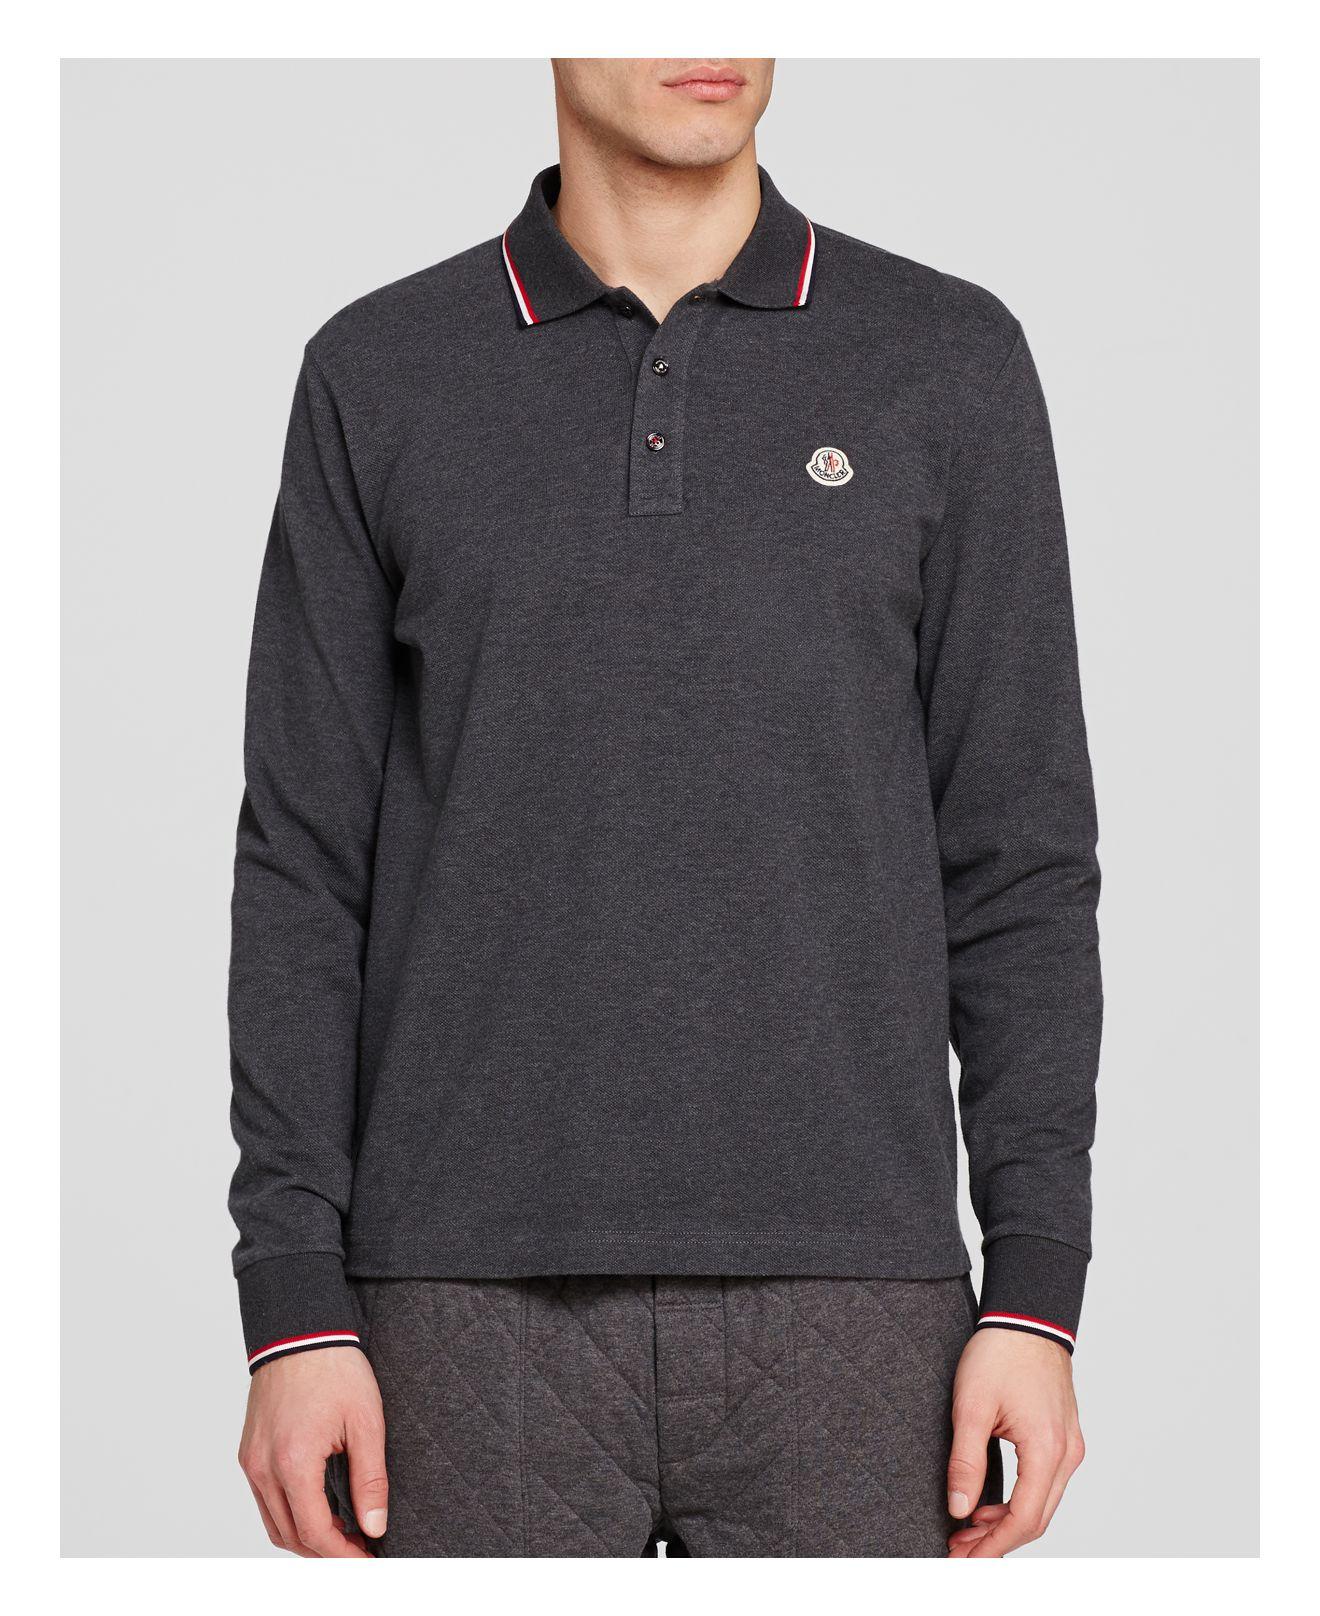 Moncler Cotton Tipped Long-sleeve Polo Shirt in Grey (Gray) for Men - Lyst